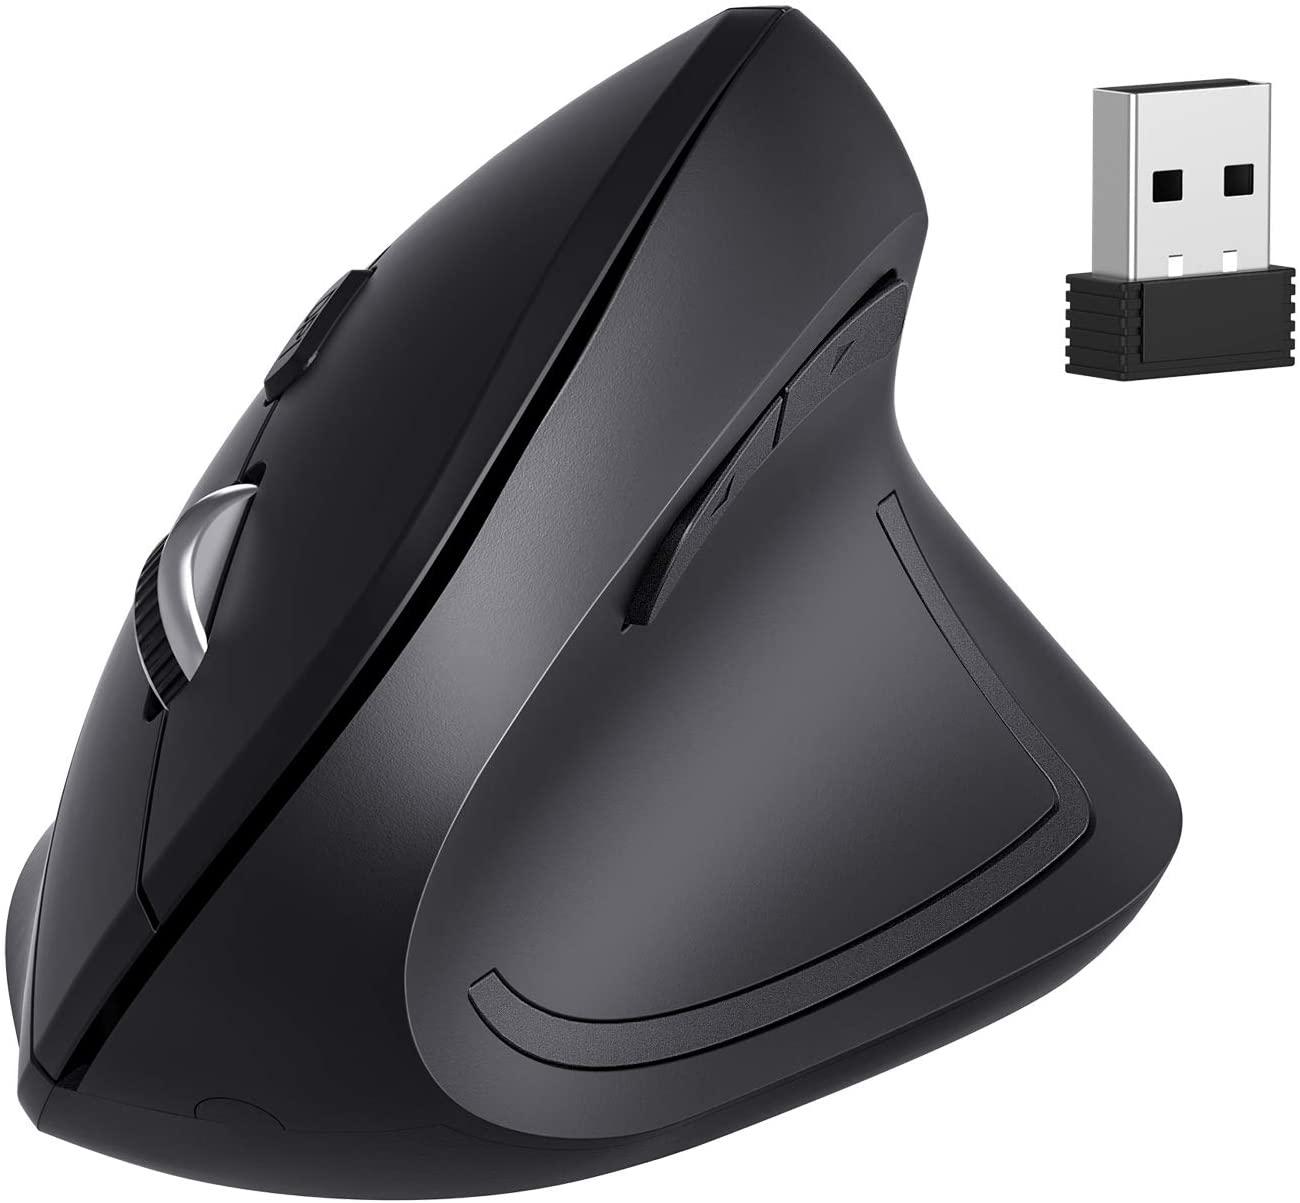 VicTsing Ergonomic Vertical 2.4G Wireless Optical Mouse for $8.83